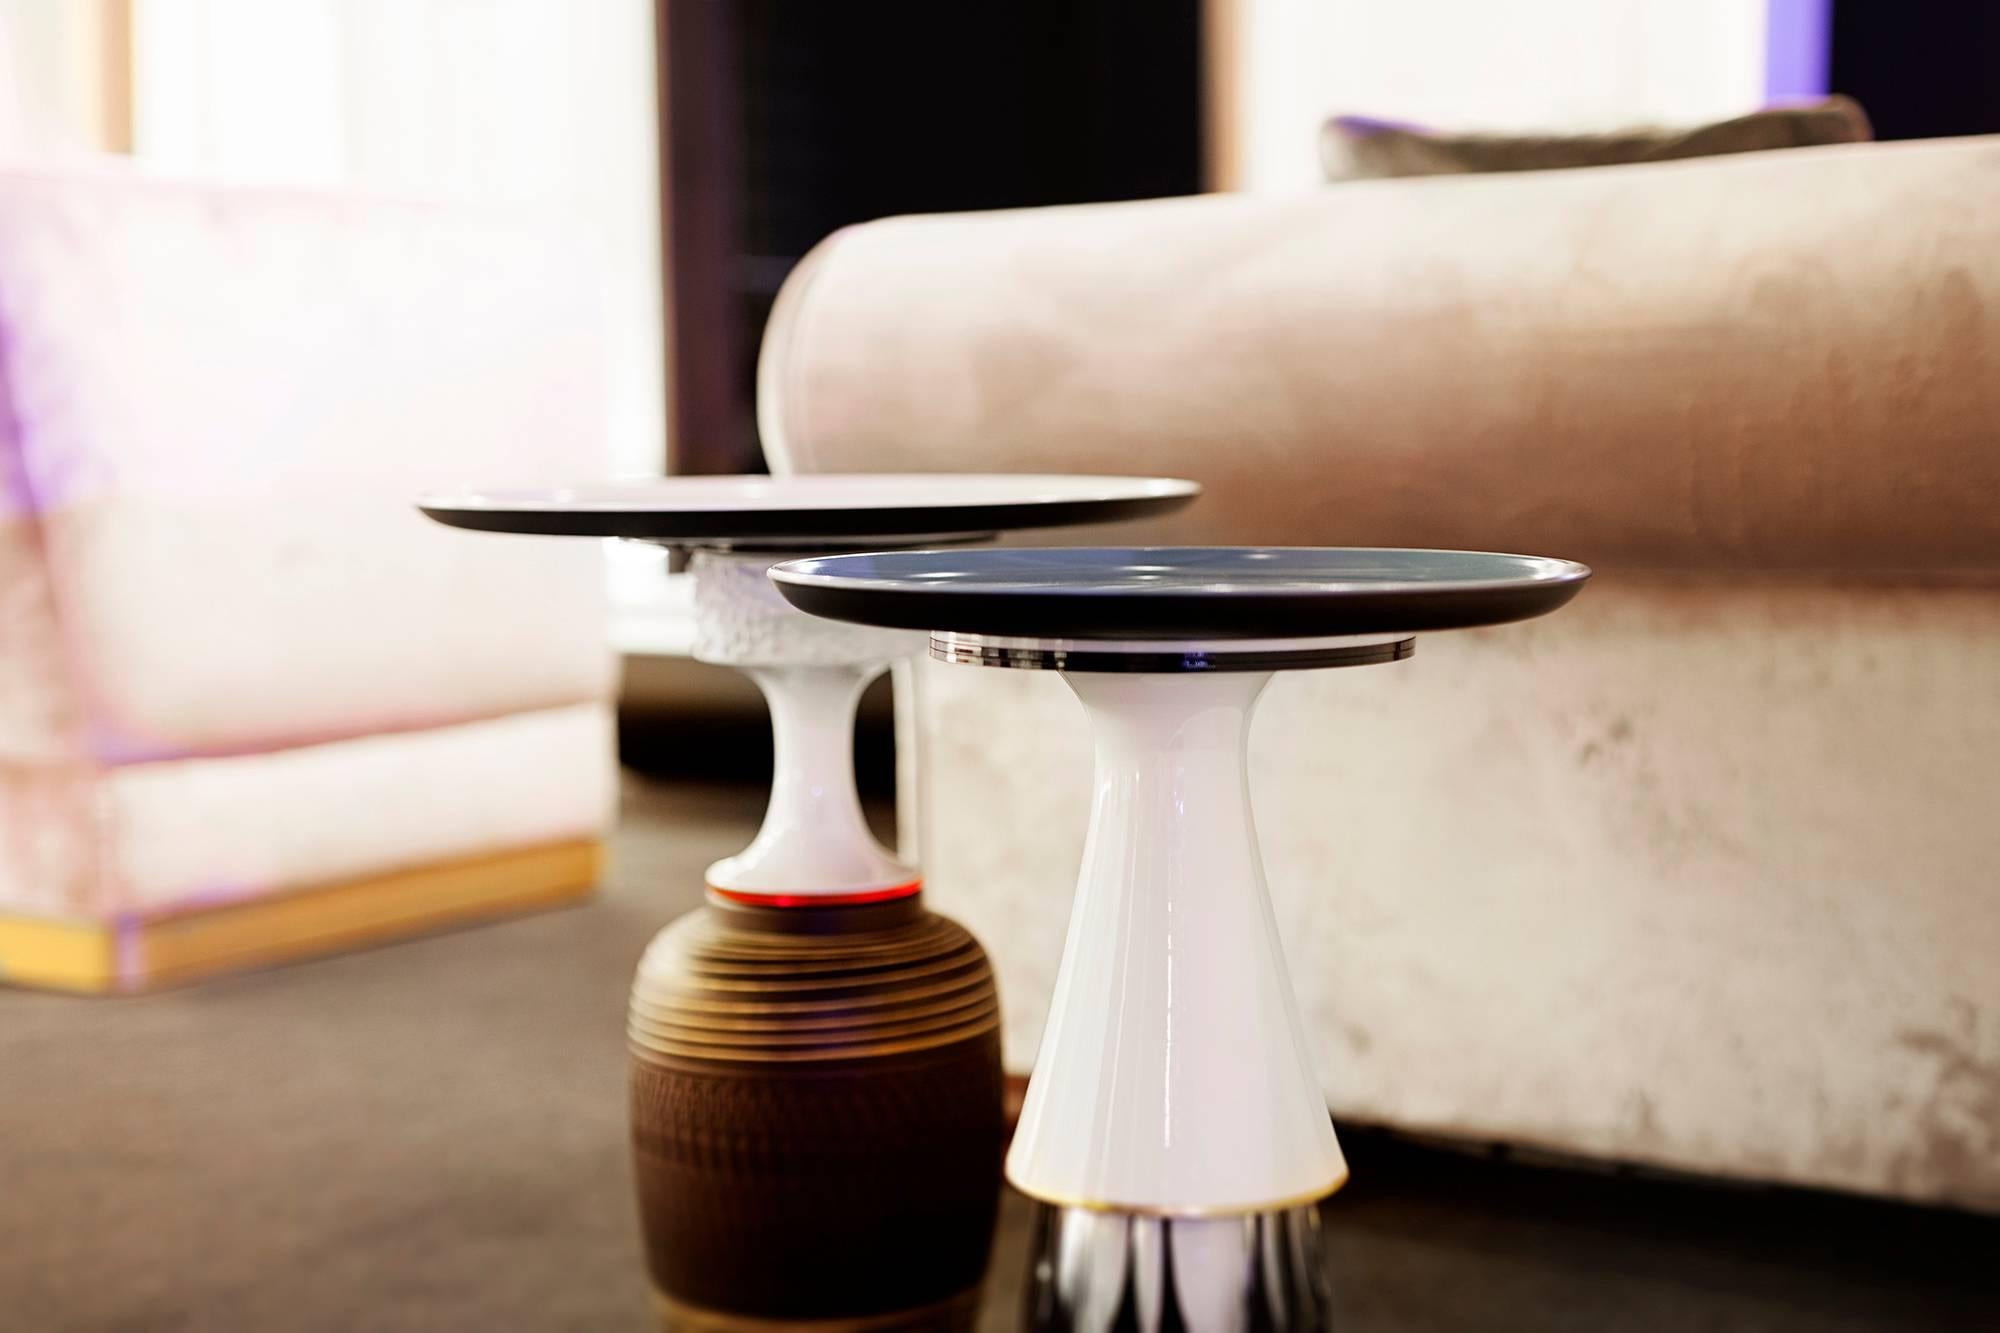 Mid-Century Modern 'Glück' side table (vintage ceramics and glass) by Andreas Berlin